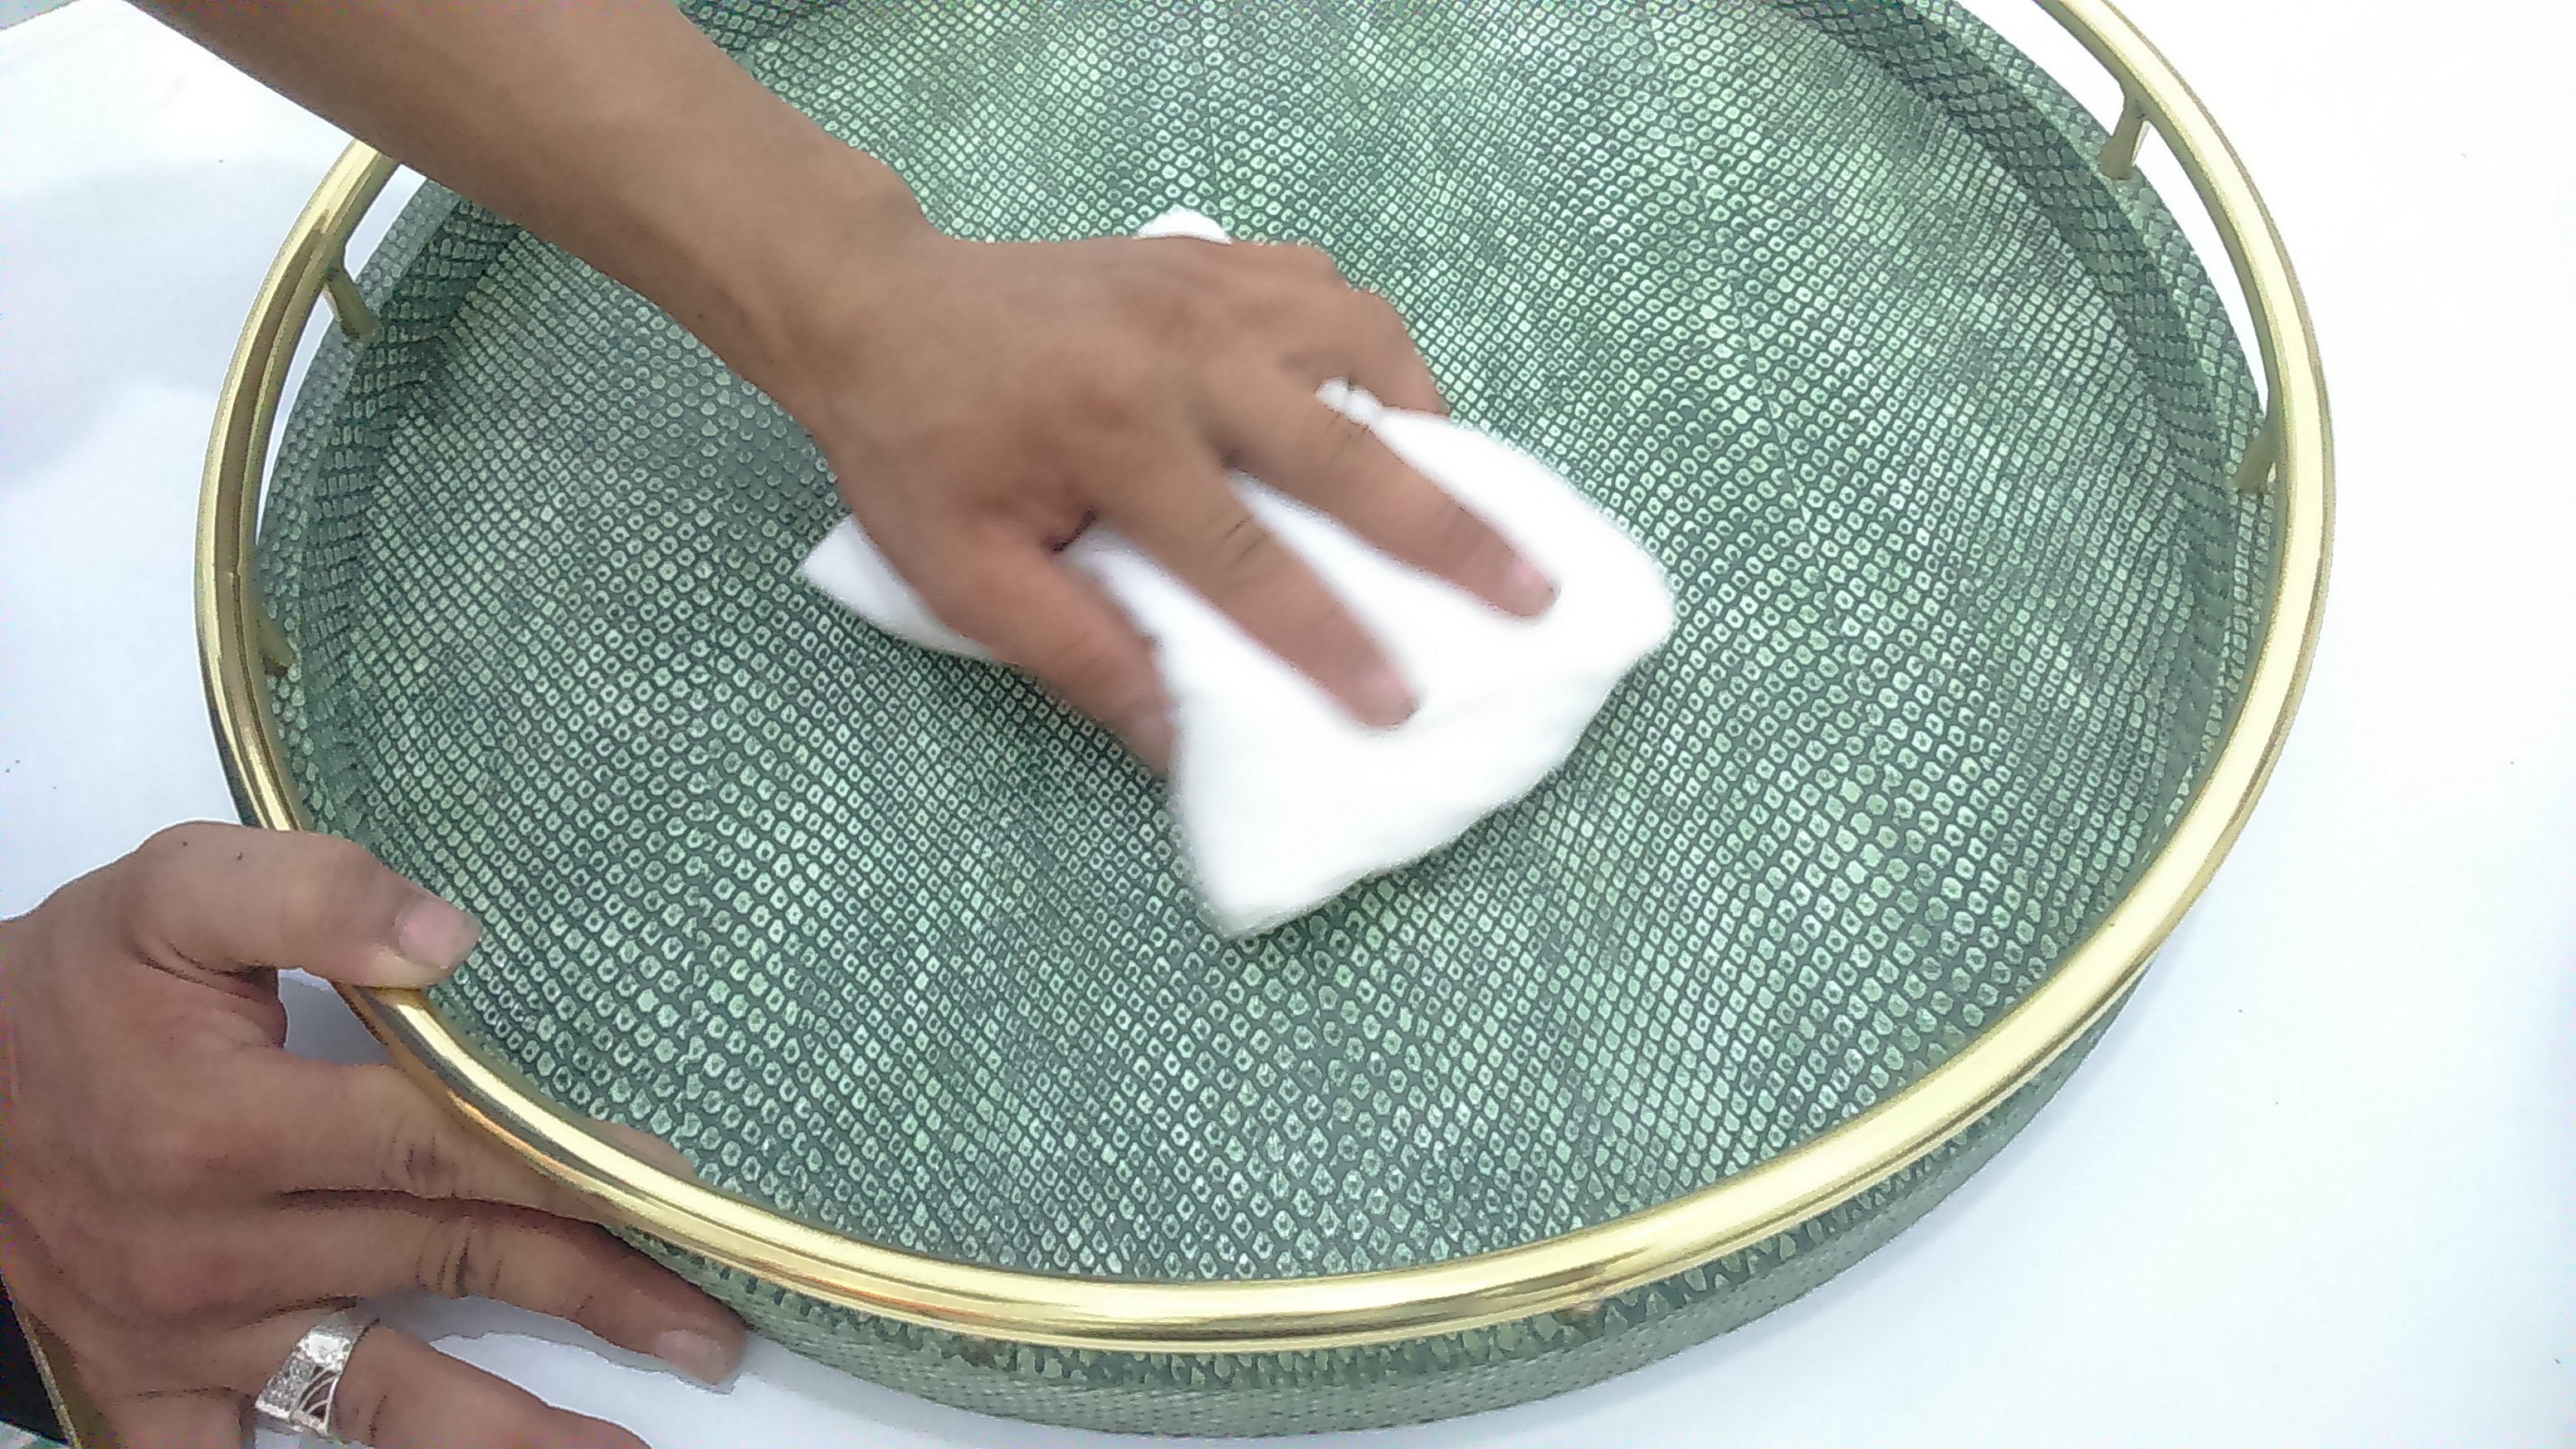 How to remove spill and stain on faux shagreen